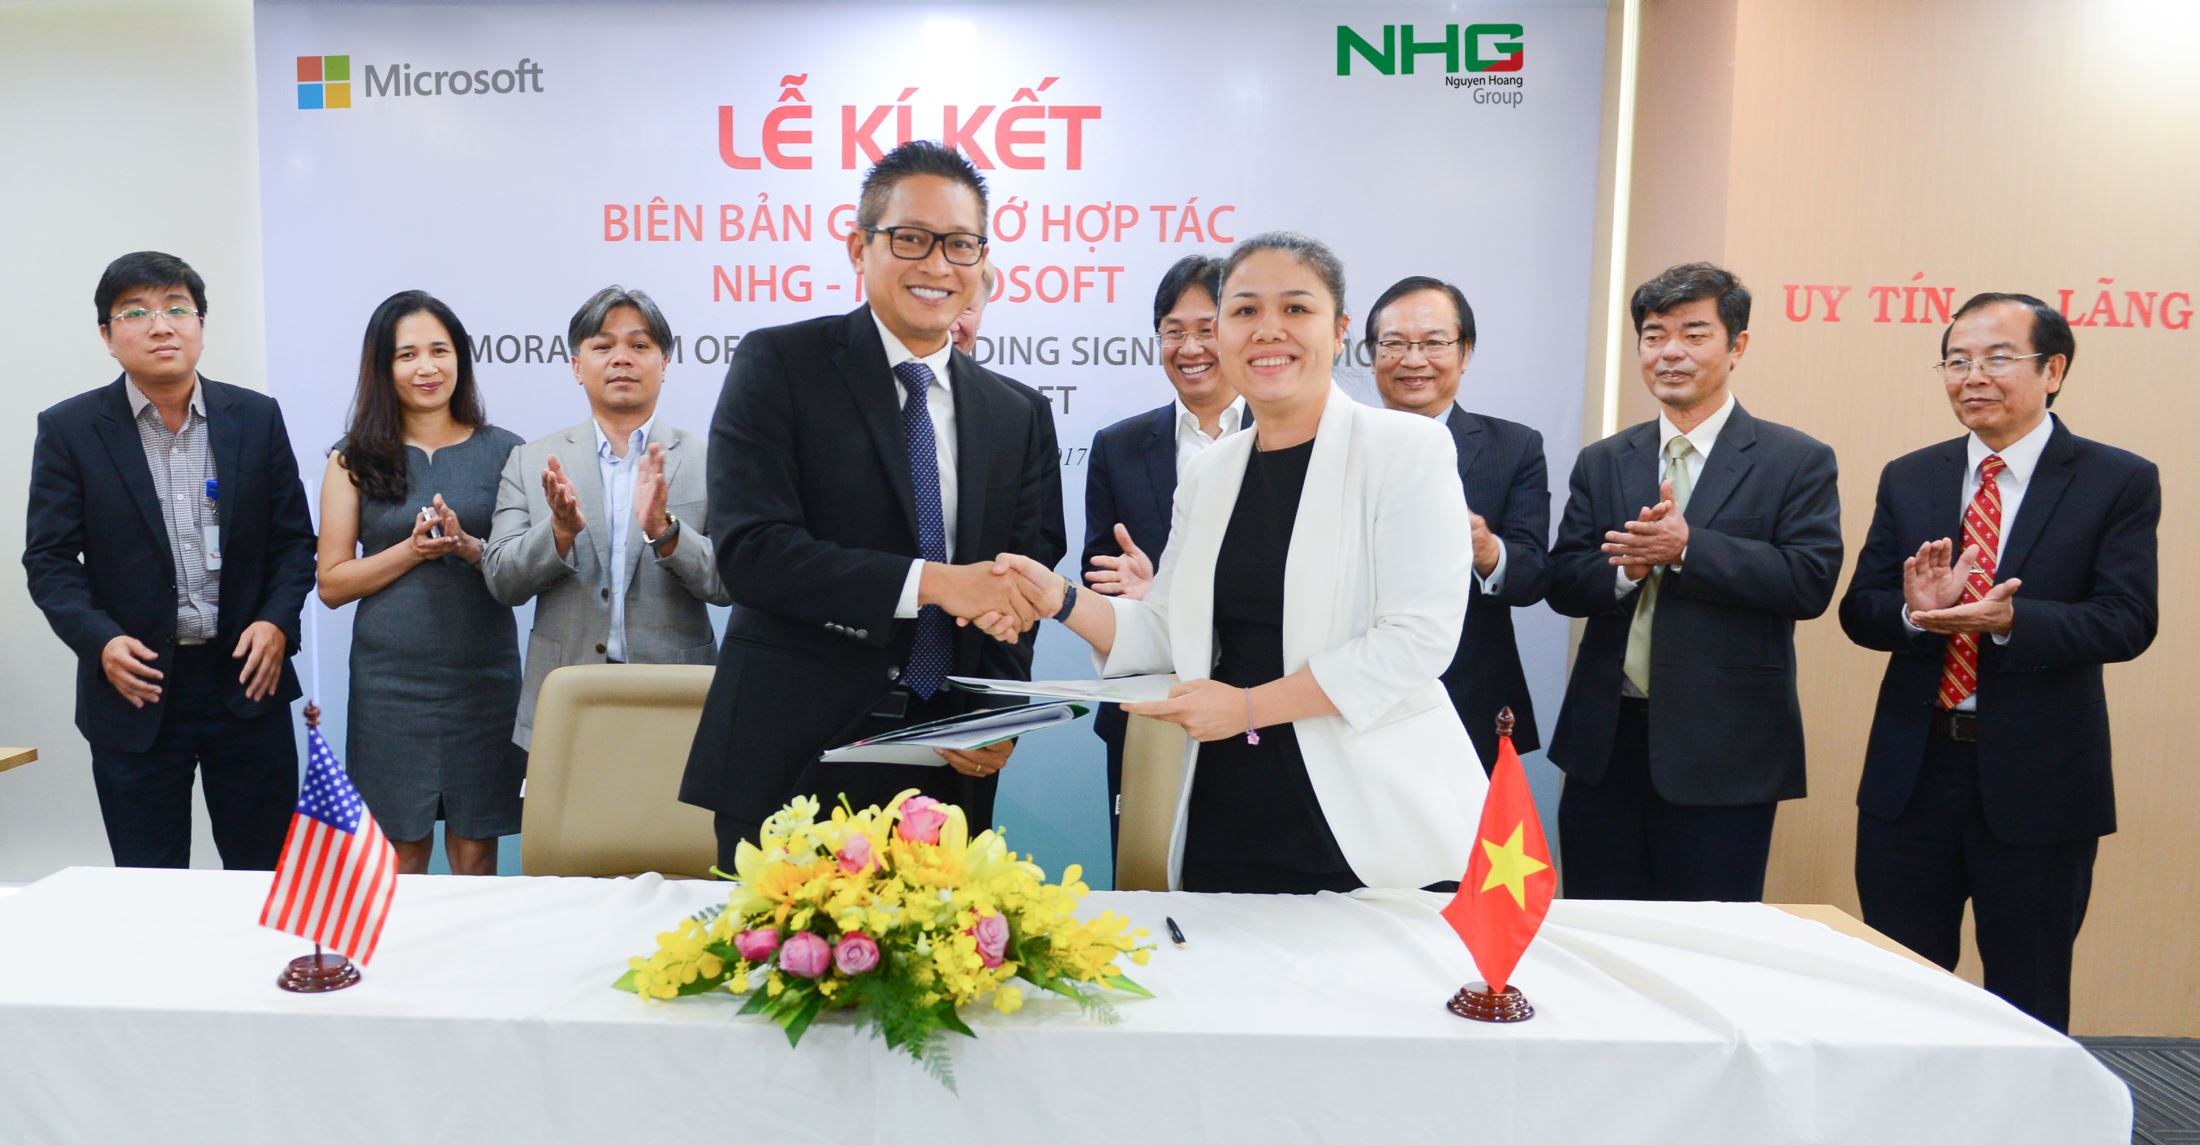 Ms. Hoang Nguyen Thu Thao, CEO of NHG and Mr. Vu Minh Tri, General Director of Microsoft Vietnam shaking hands after the signing ceremony at NHG office.